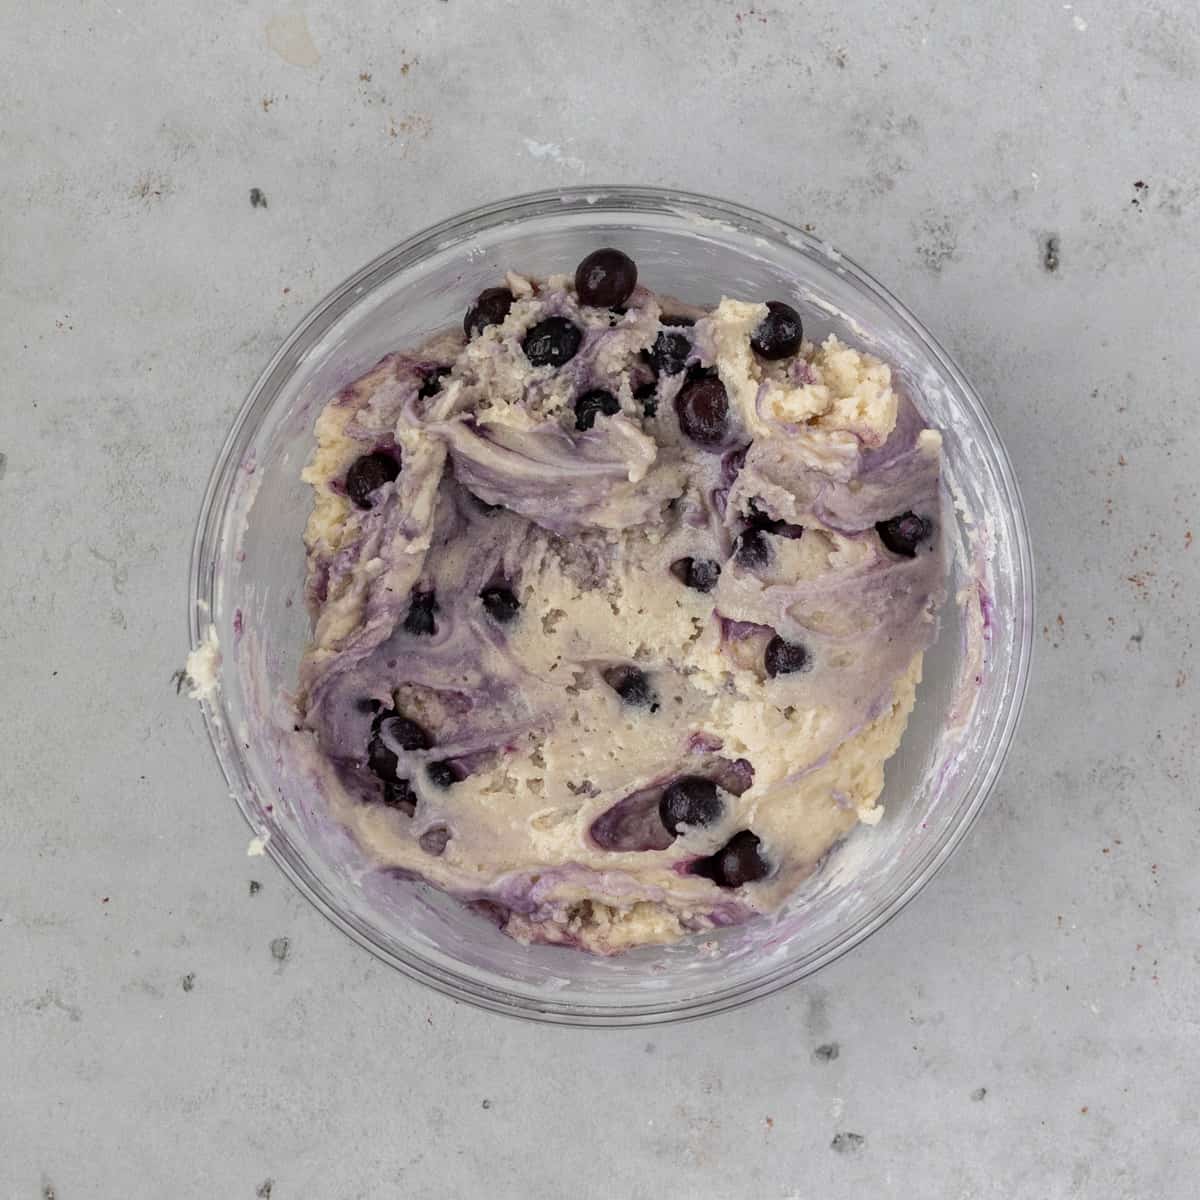 the completed gluten free blueberry muffin batter in a glass bowl on a grey background